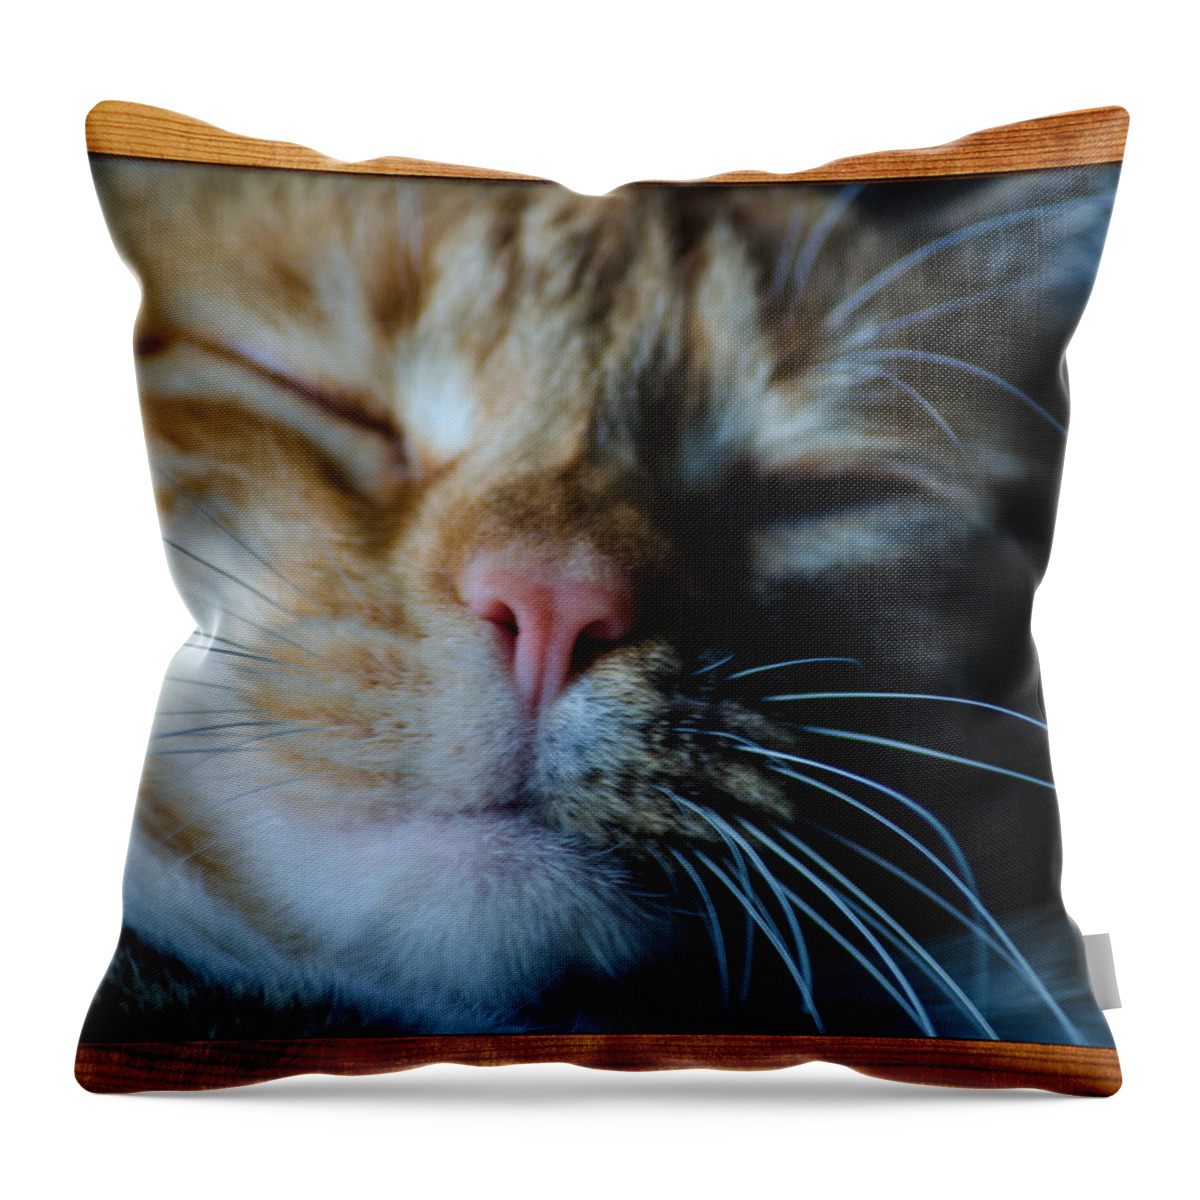 Cat Throw Pillow featuring the photograph Sleeping Abby Framed by Tikvah's Hope